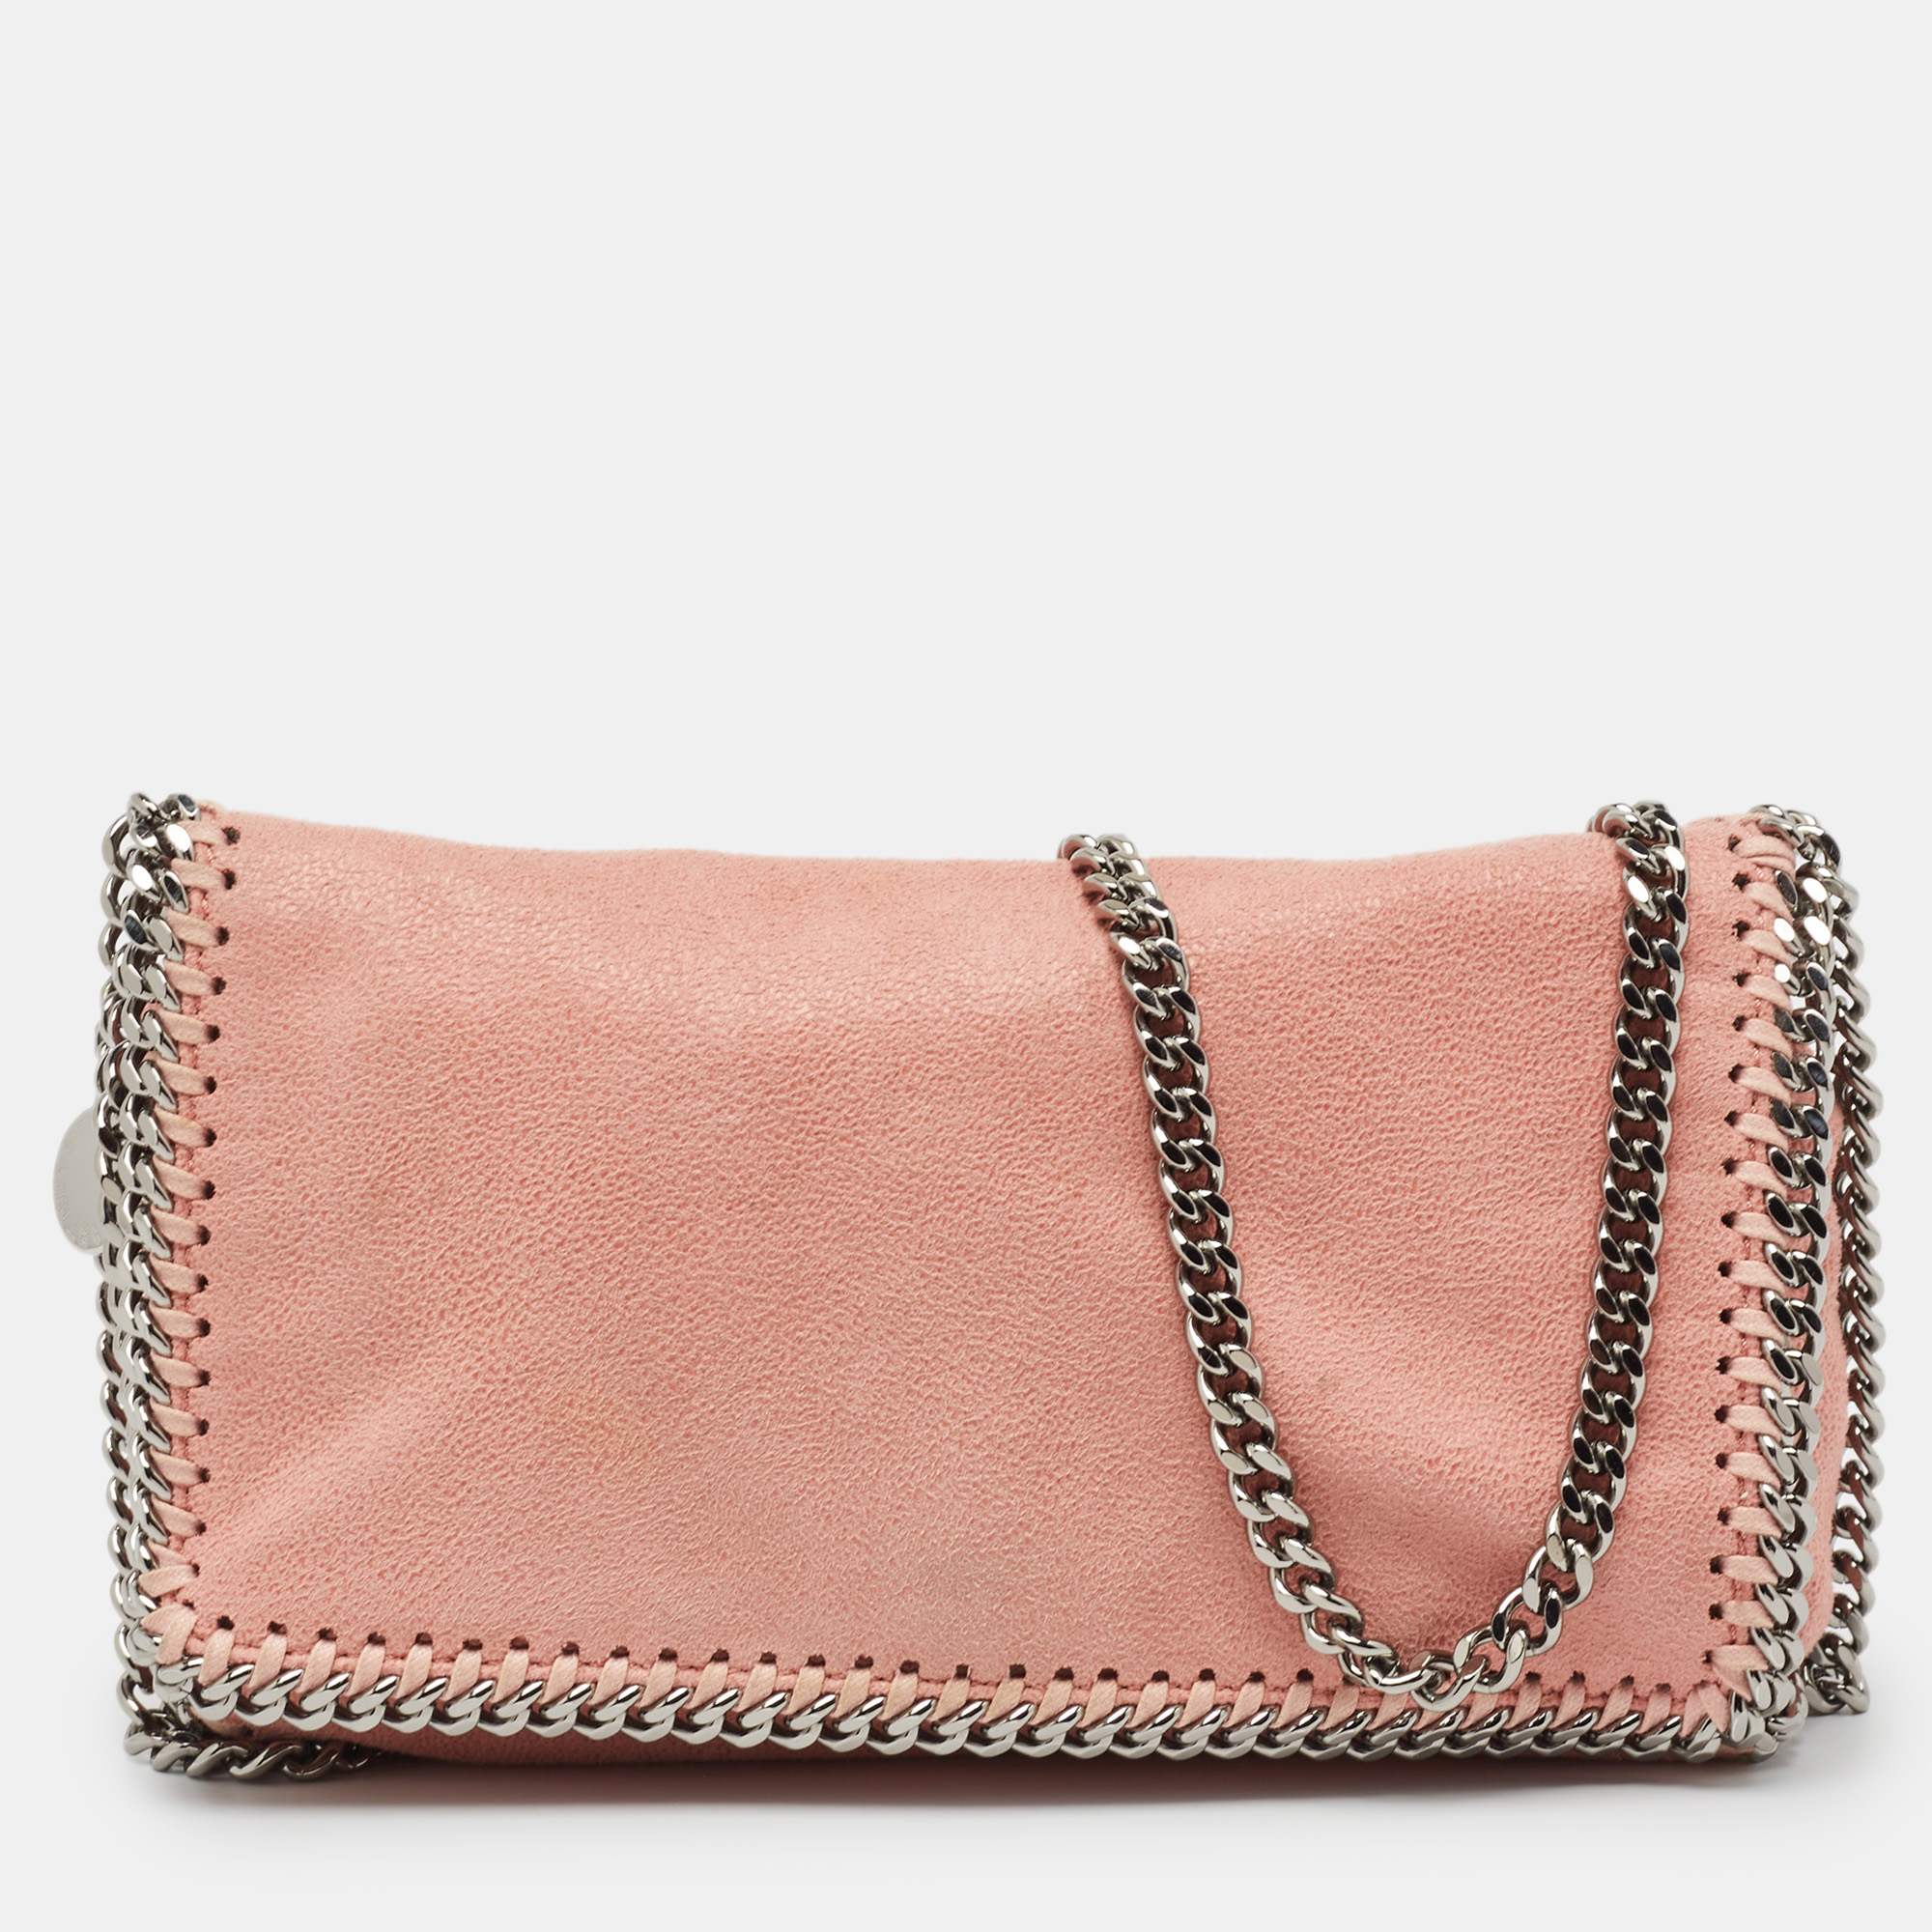 Pre-owned Stella Mccartney Pink Faux Leather Falabella Chain Shoulder Bag